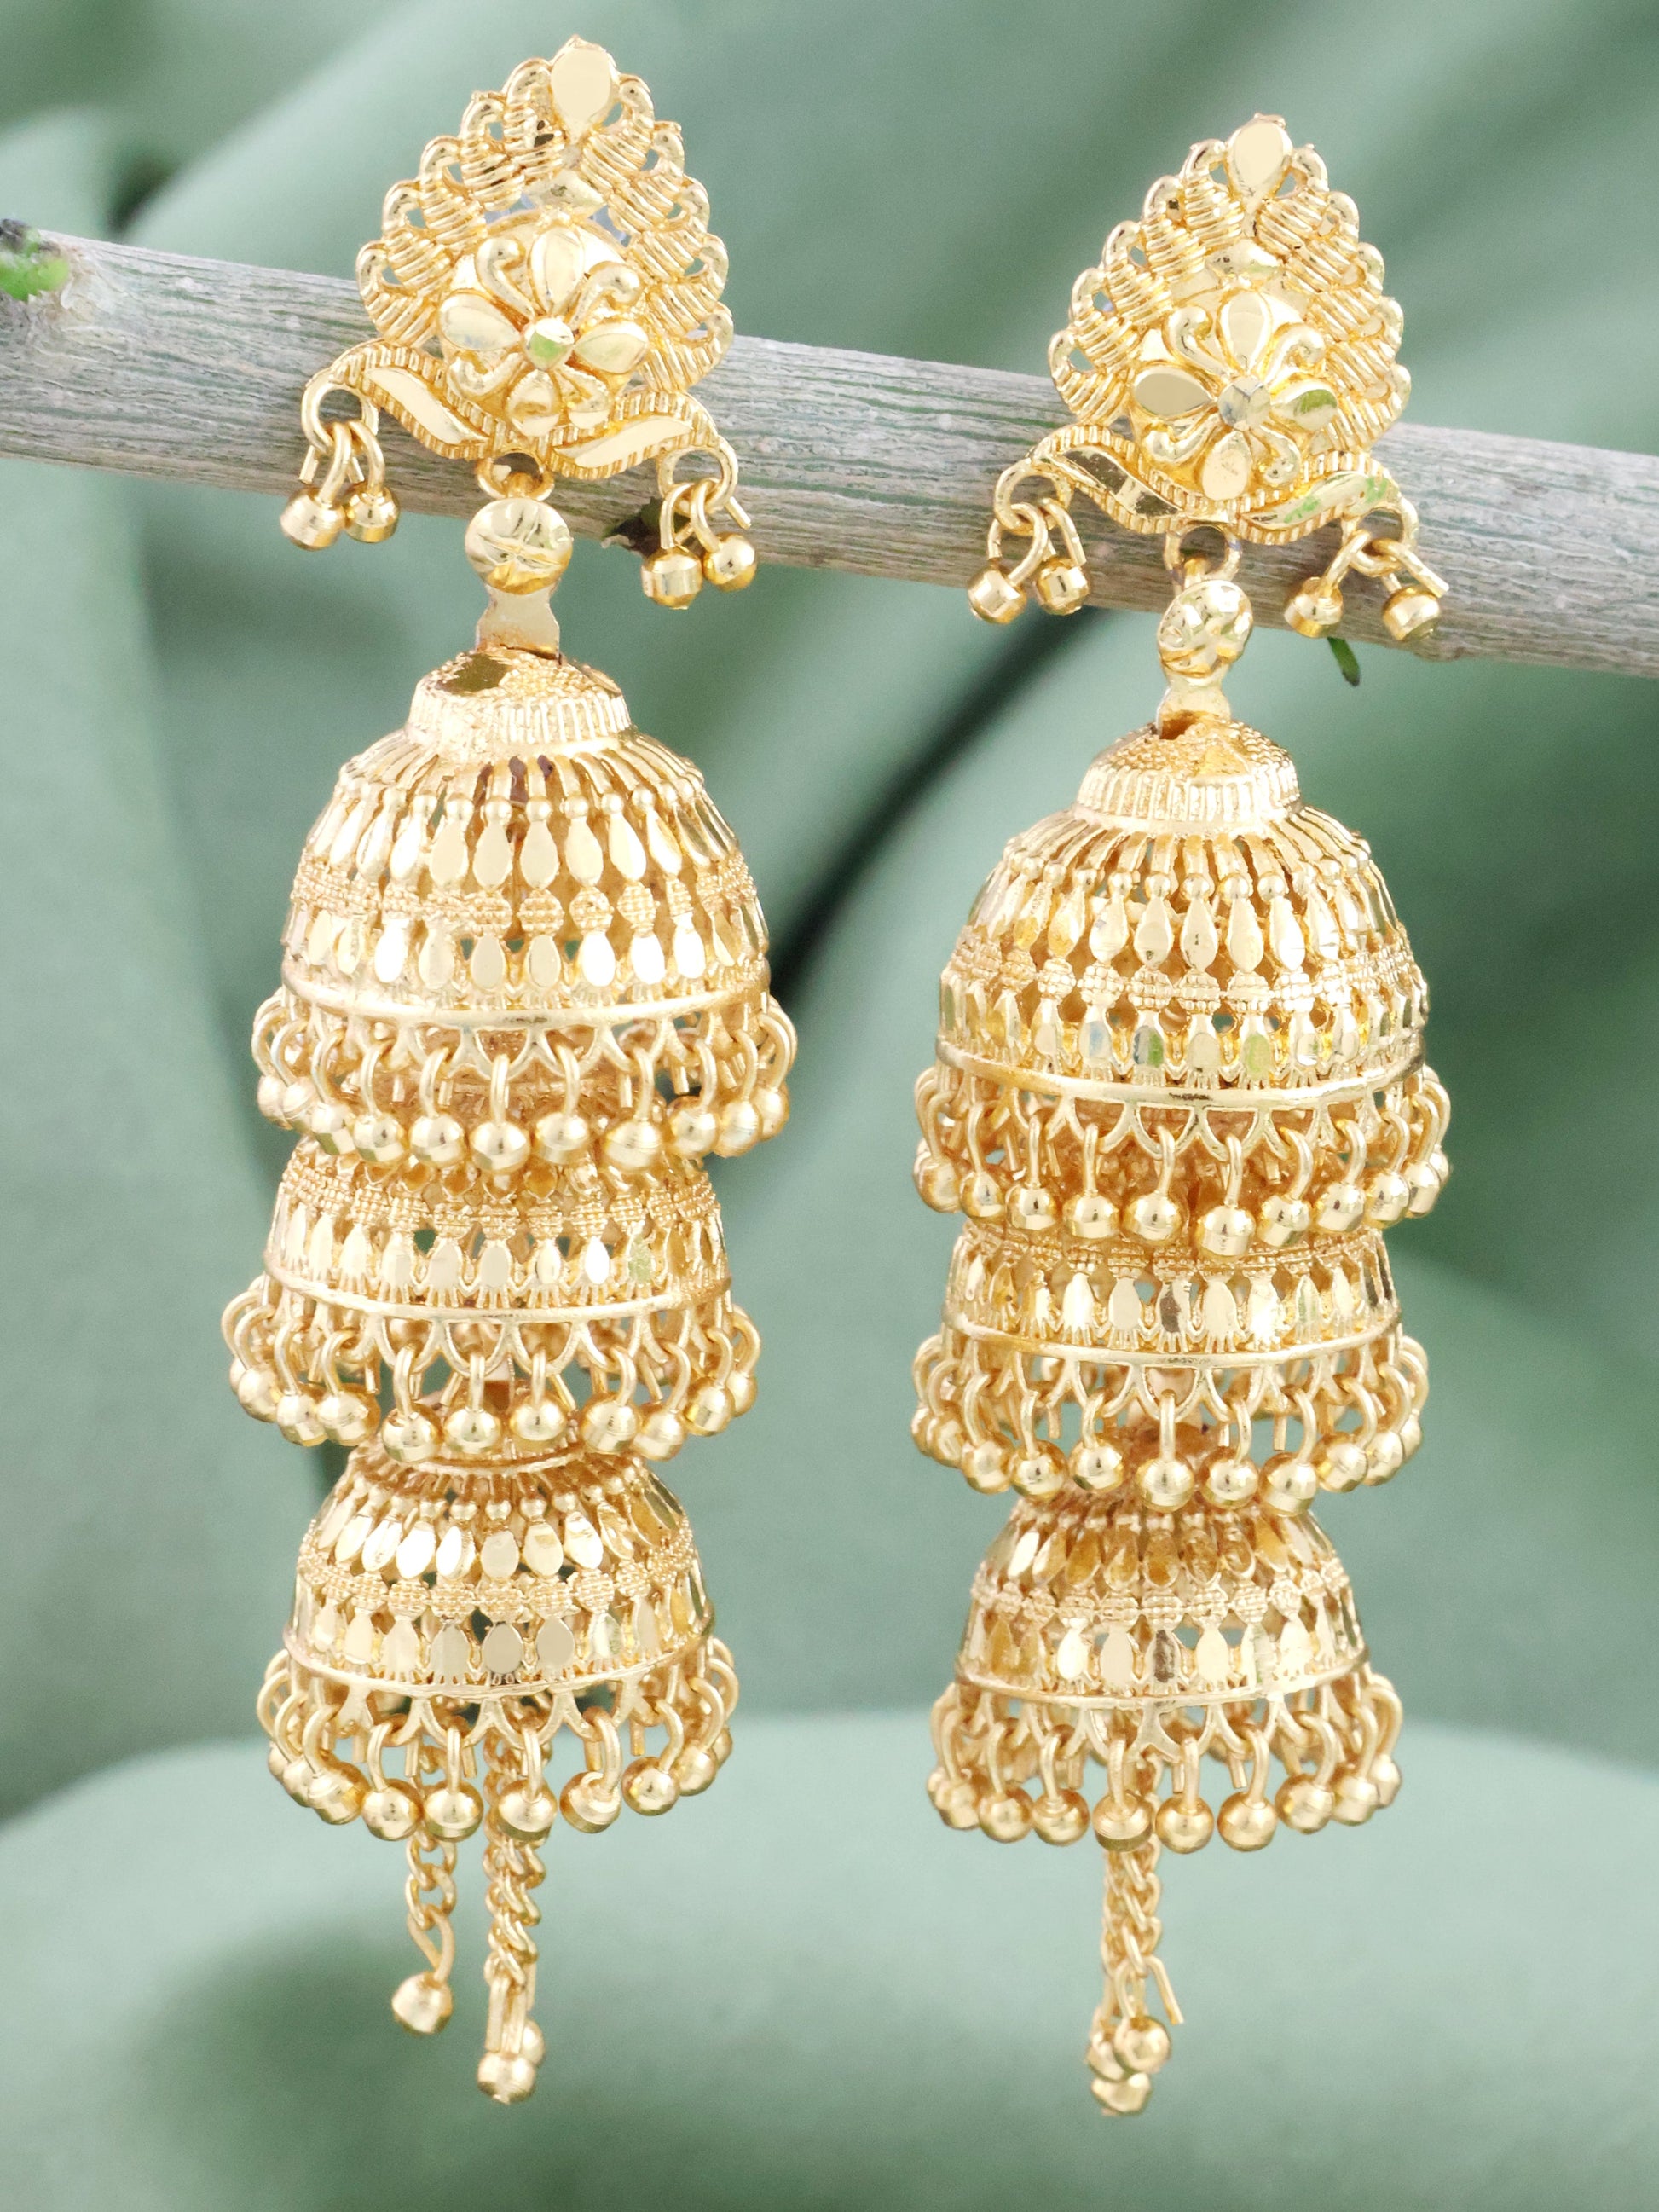 Close-up of a pair of Mekkna Gold Plated Jhumki Earrings. The earrings feature intricate designs with gold plating and traditional Indian jhumki style.